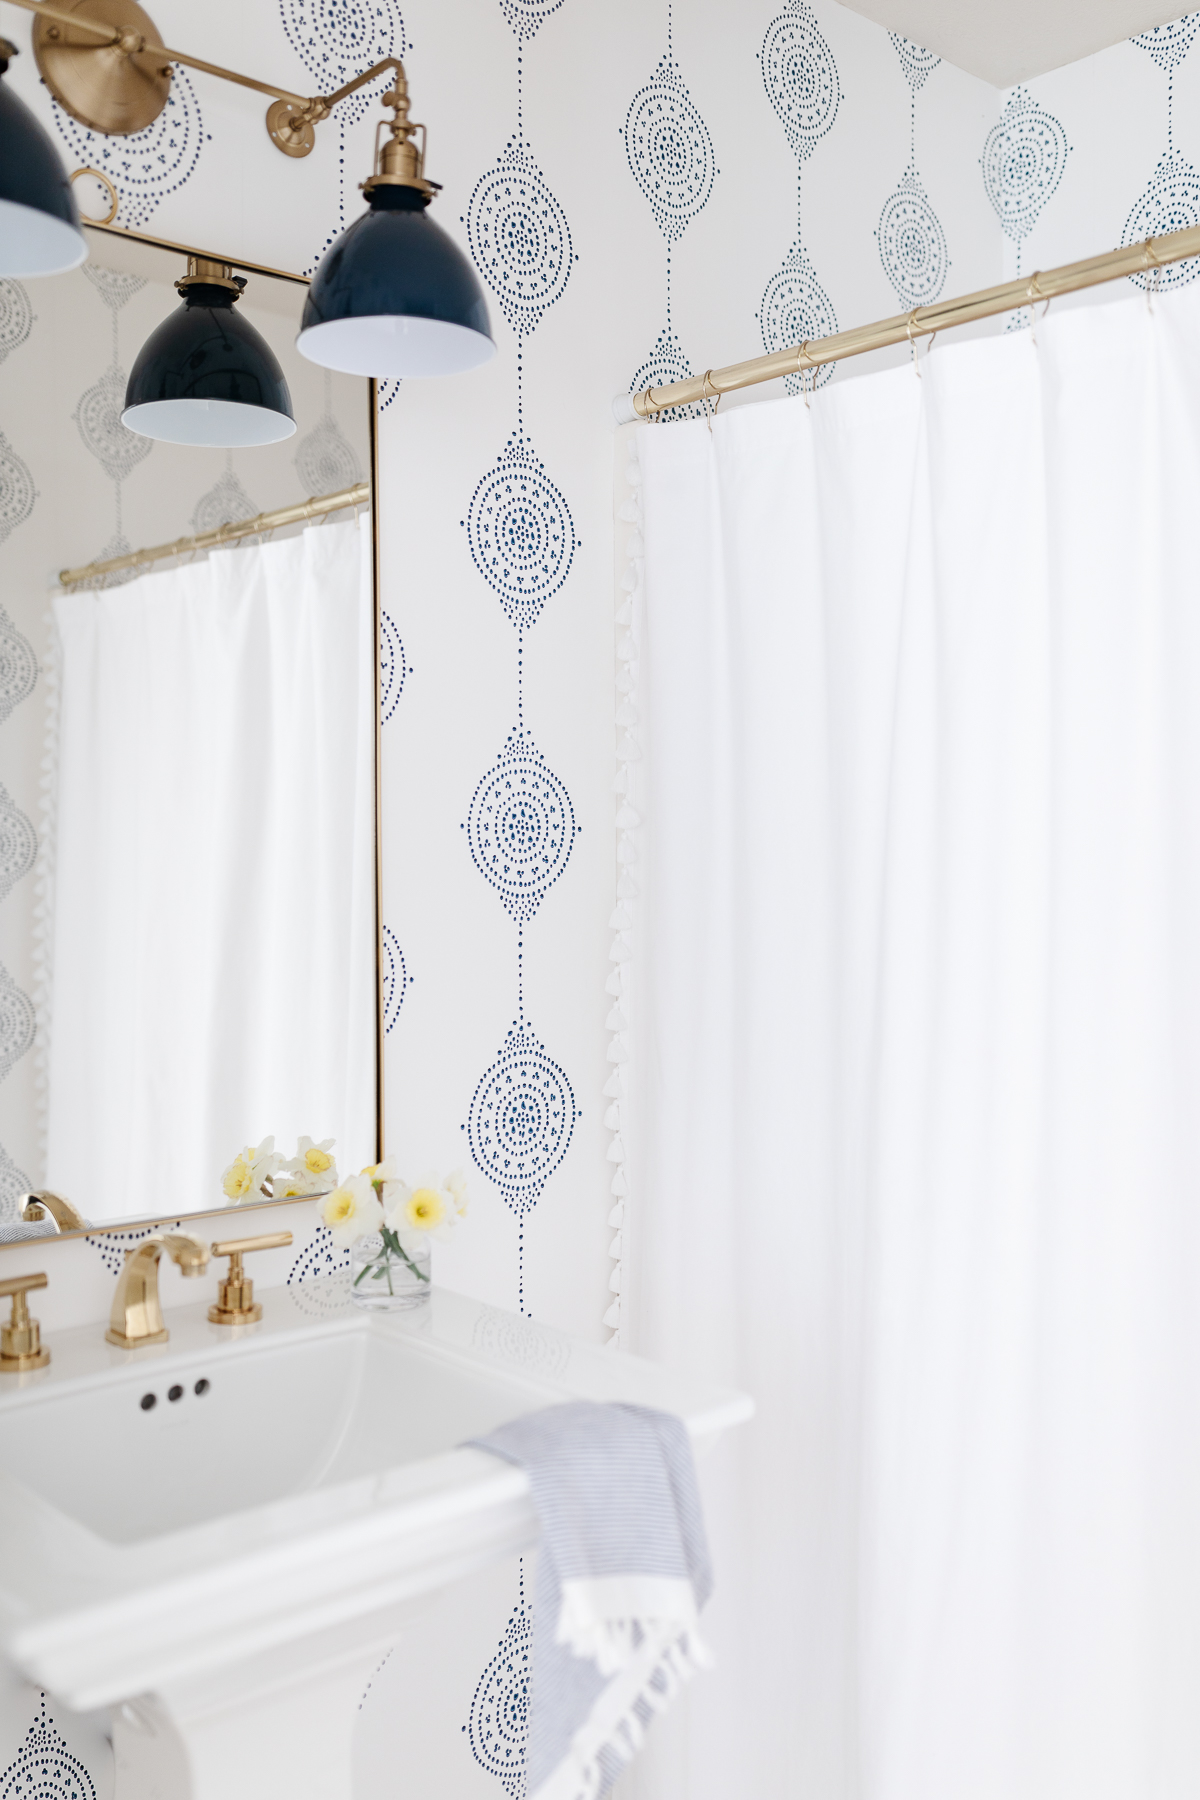 A bathroom with navy blue and white block print wallpaper.